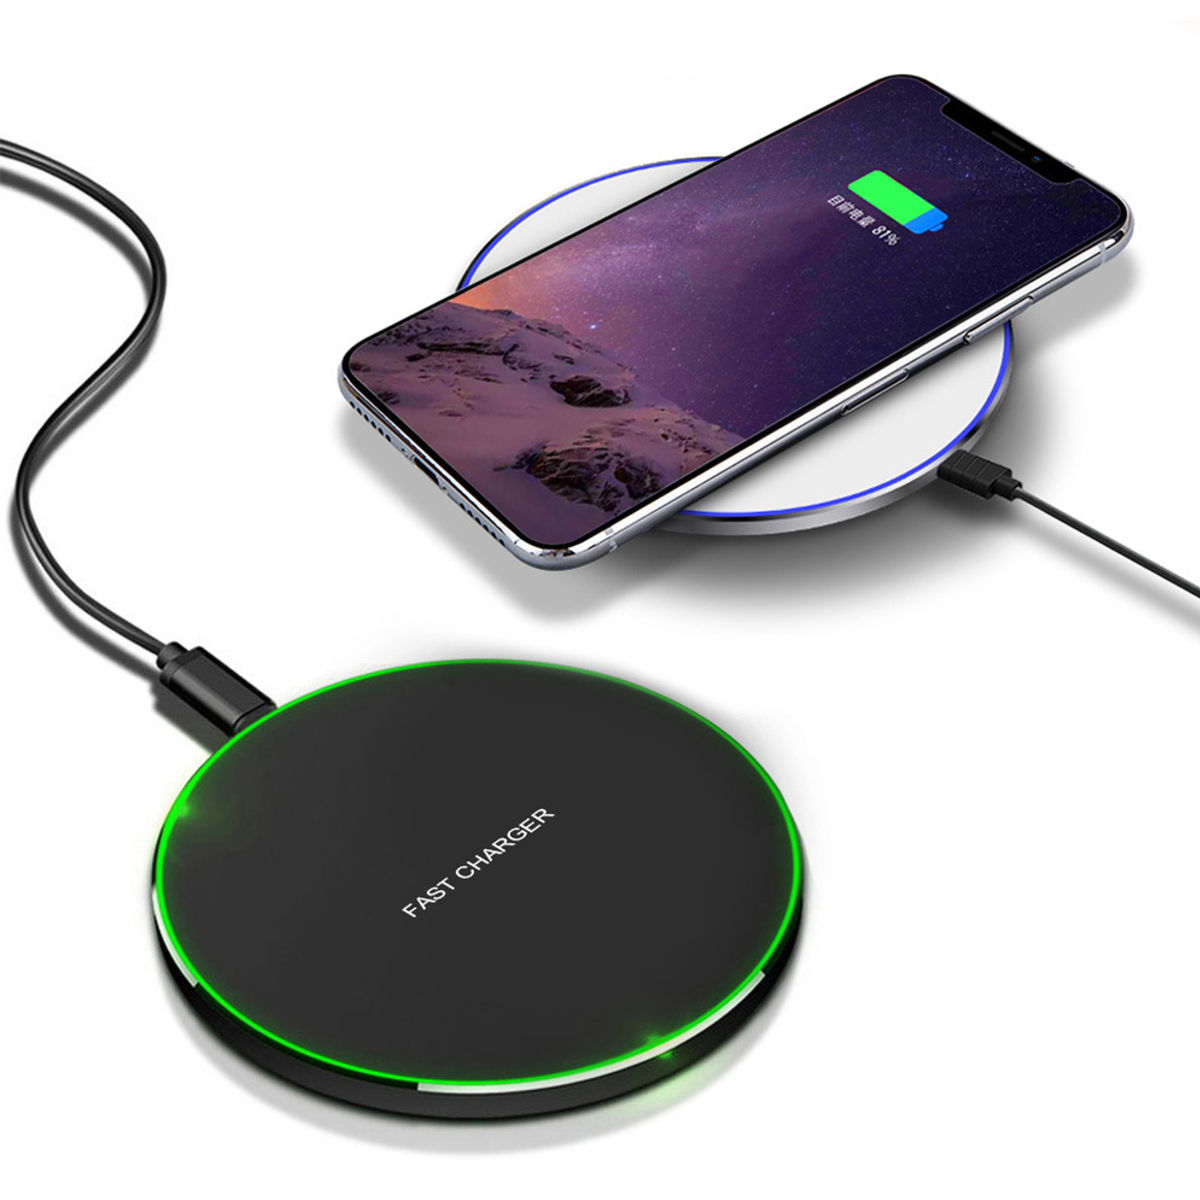 Bakeey 20W Qi Wireless Fast Charger Charging Bracket Pad Mat For iPhone 10 Pro Xiaomi 10 Pro - Black